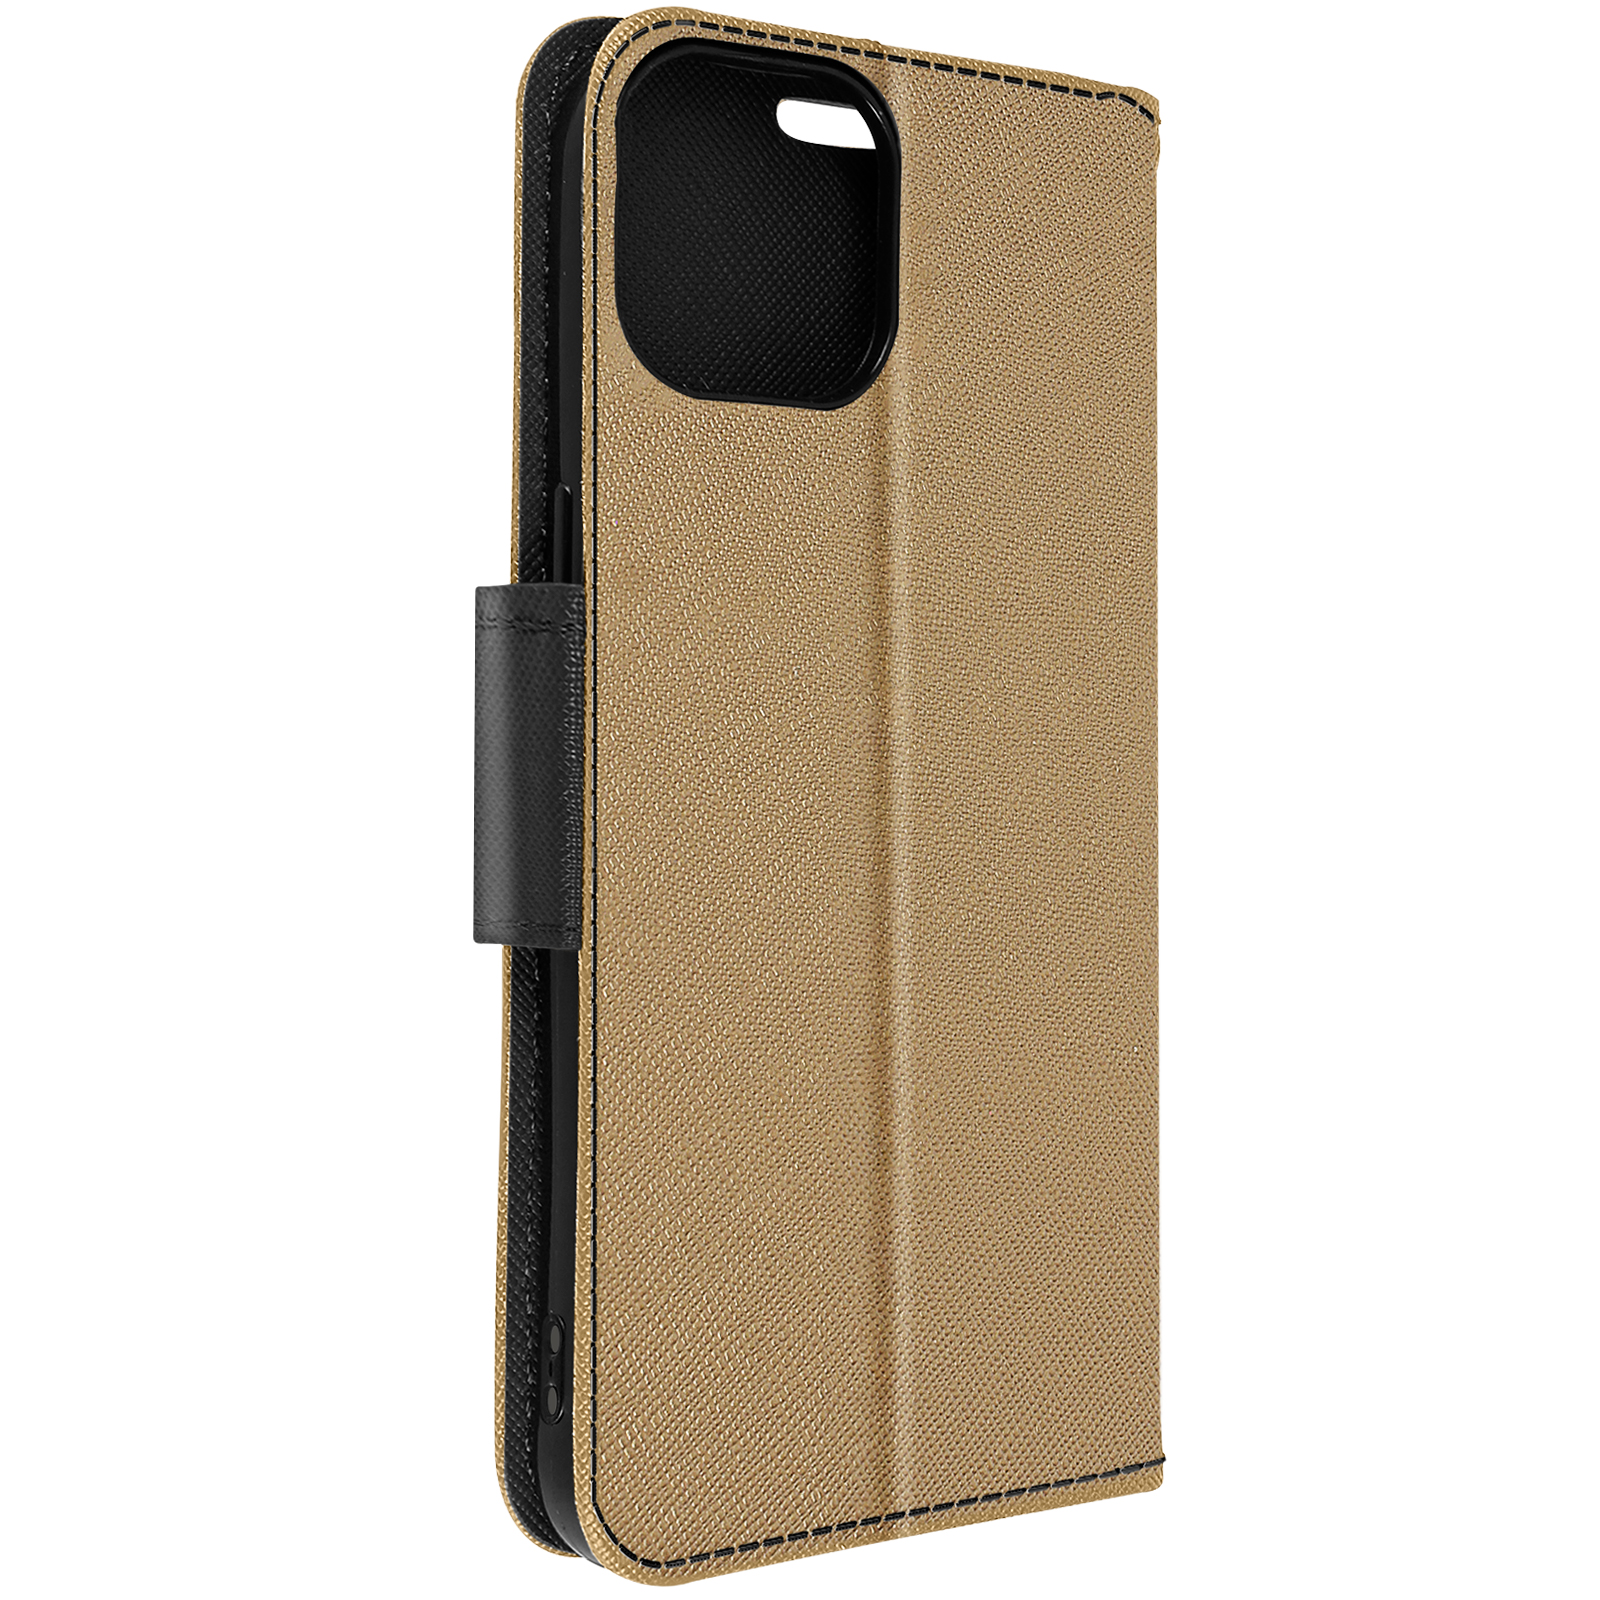 Series, 13 Max, AVIZAR Fancy Pro Apple, Bookcover, Gold iPhone